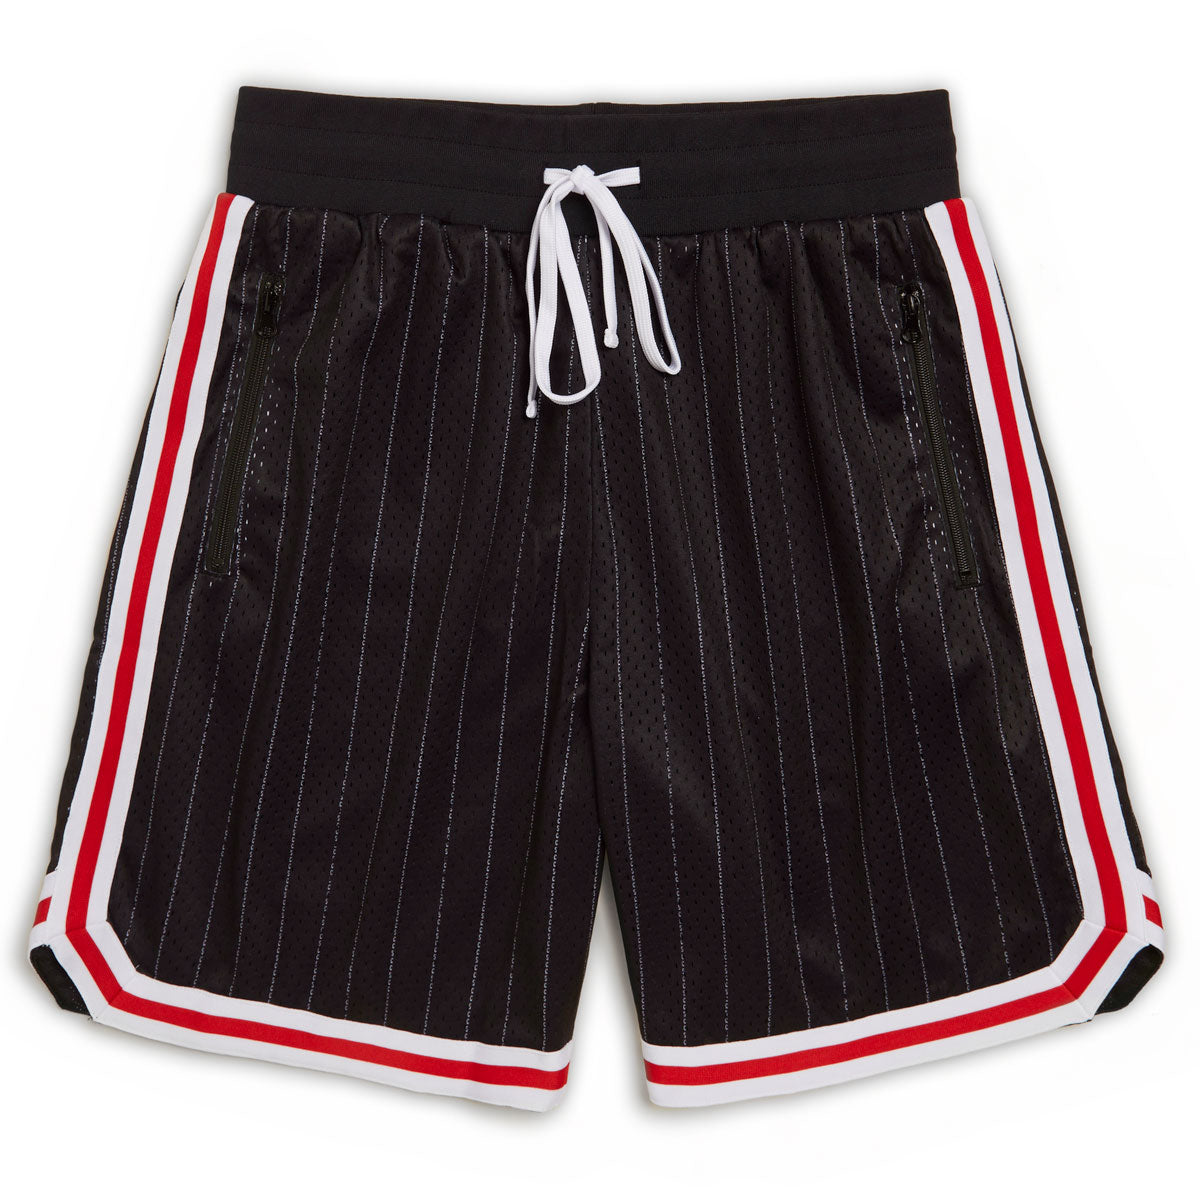 CCS Crossover Basketball Shorts - Black/Red image 1